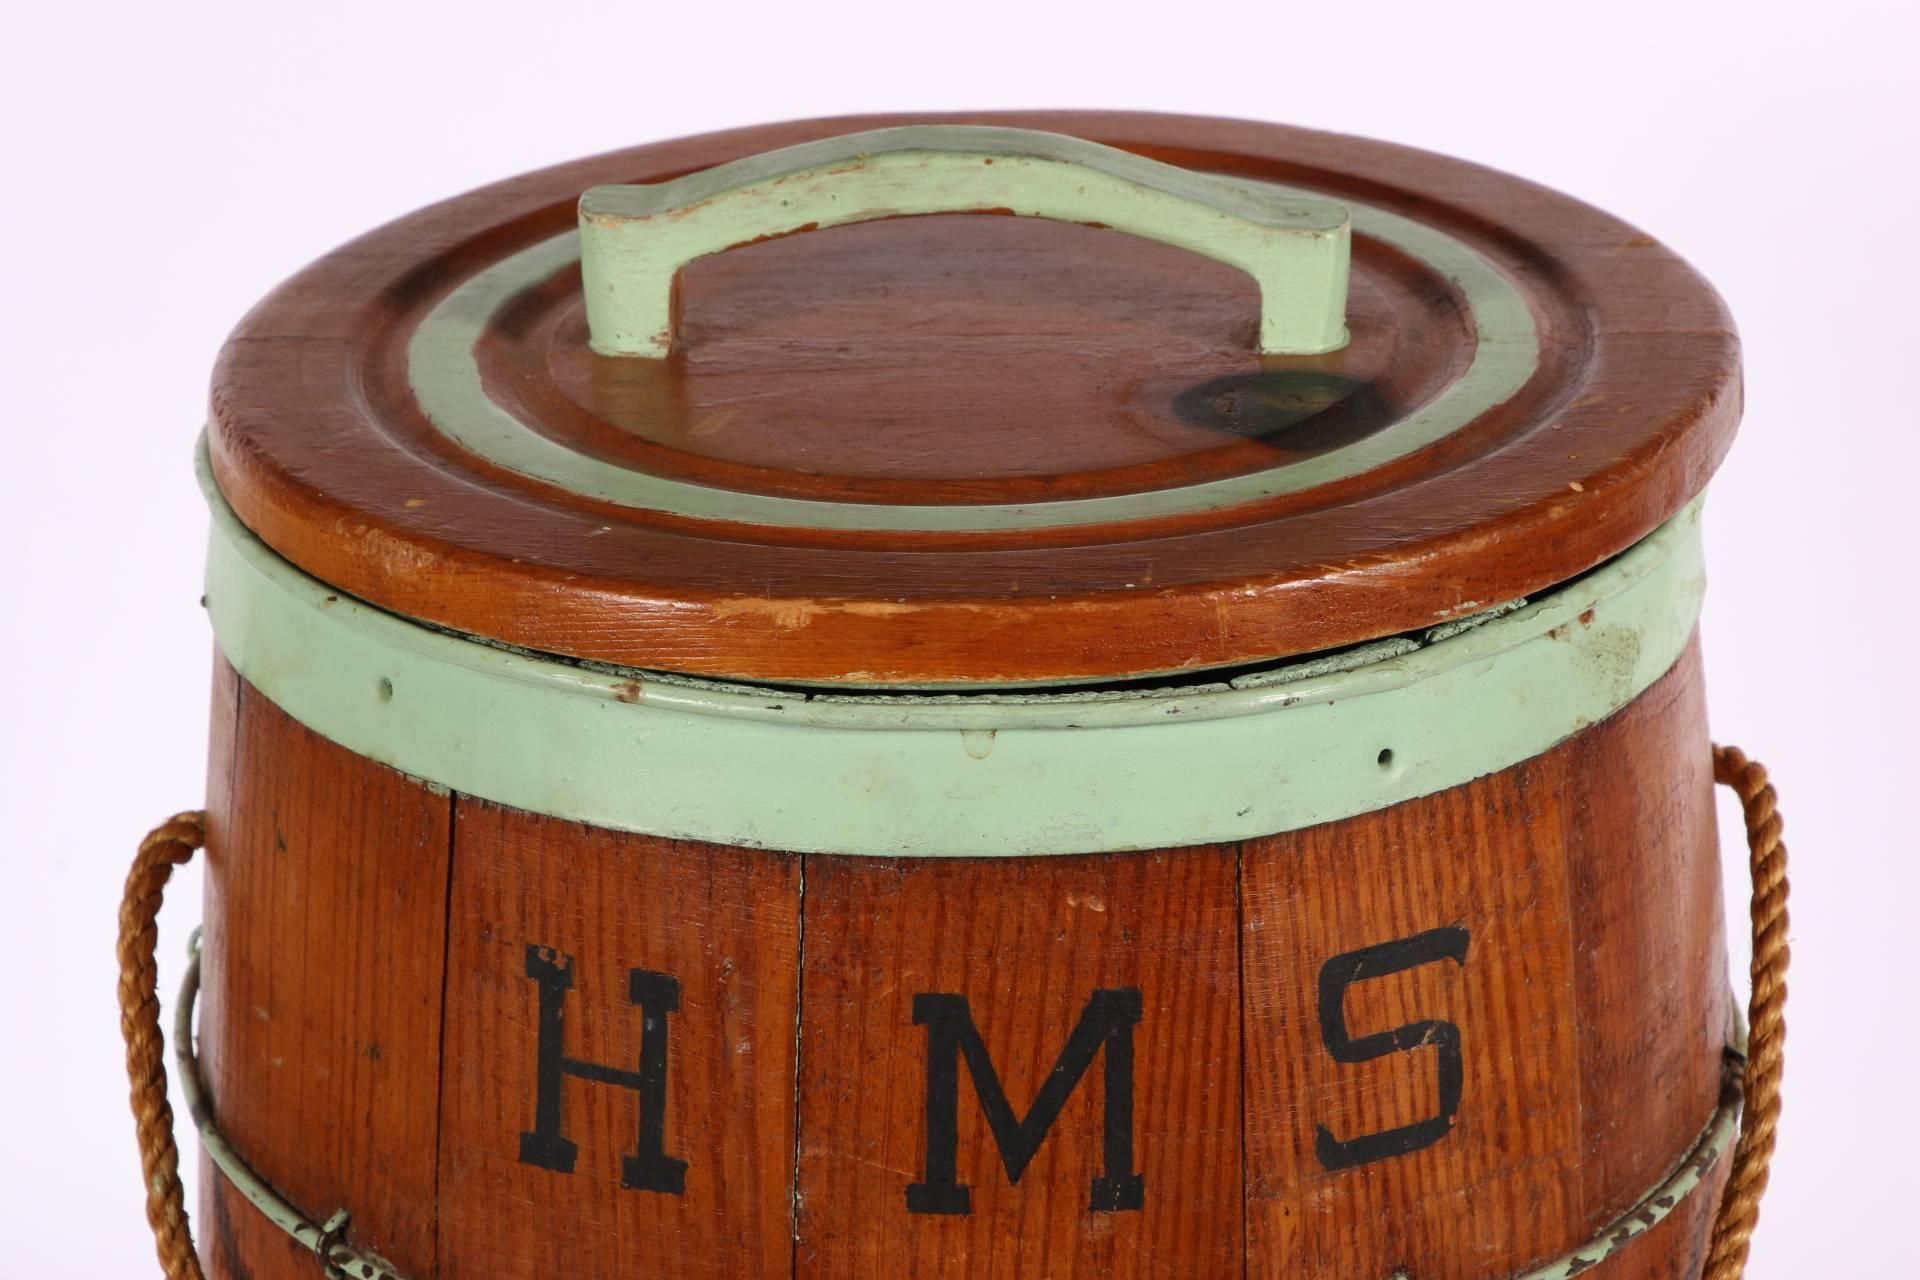 Antique barrel form nail box having green paint decorated iron binding, panelled construction, painted HMS Bounty, 1789. Rope cord handle, green paint decorated interior.
Condition: some rust, consistent with age and use.